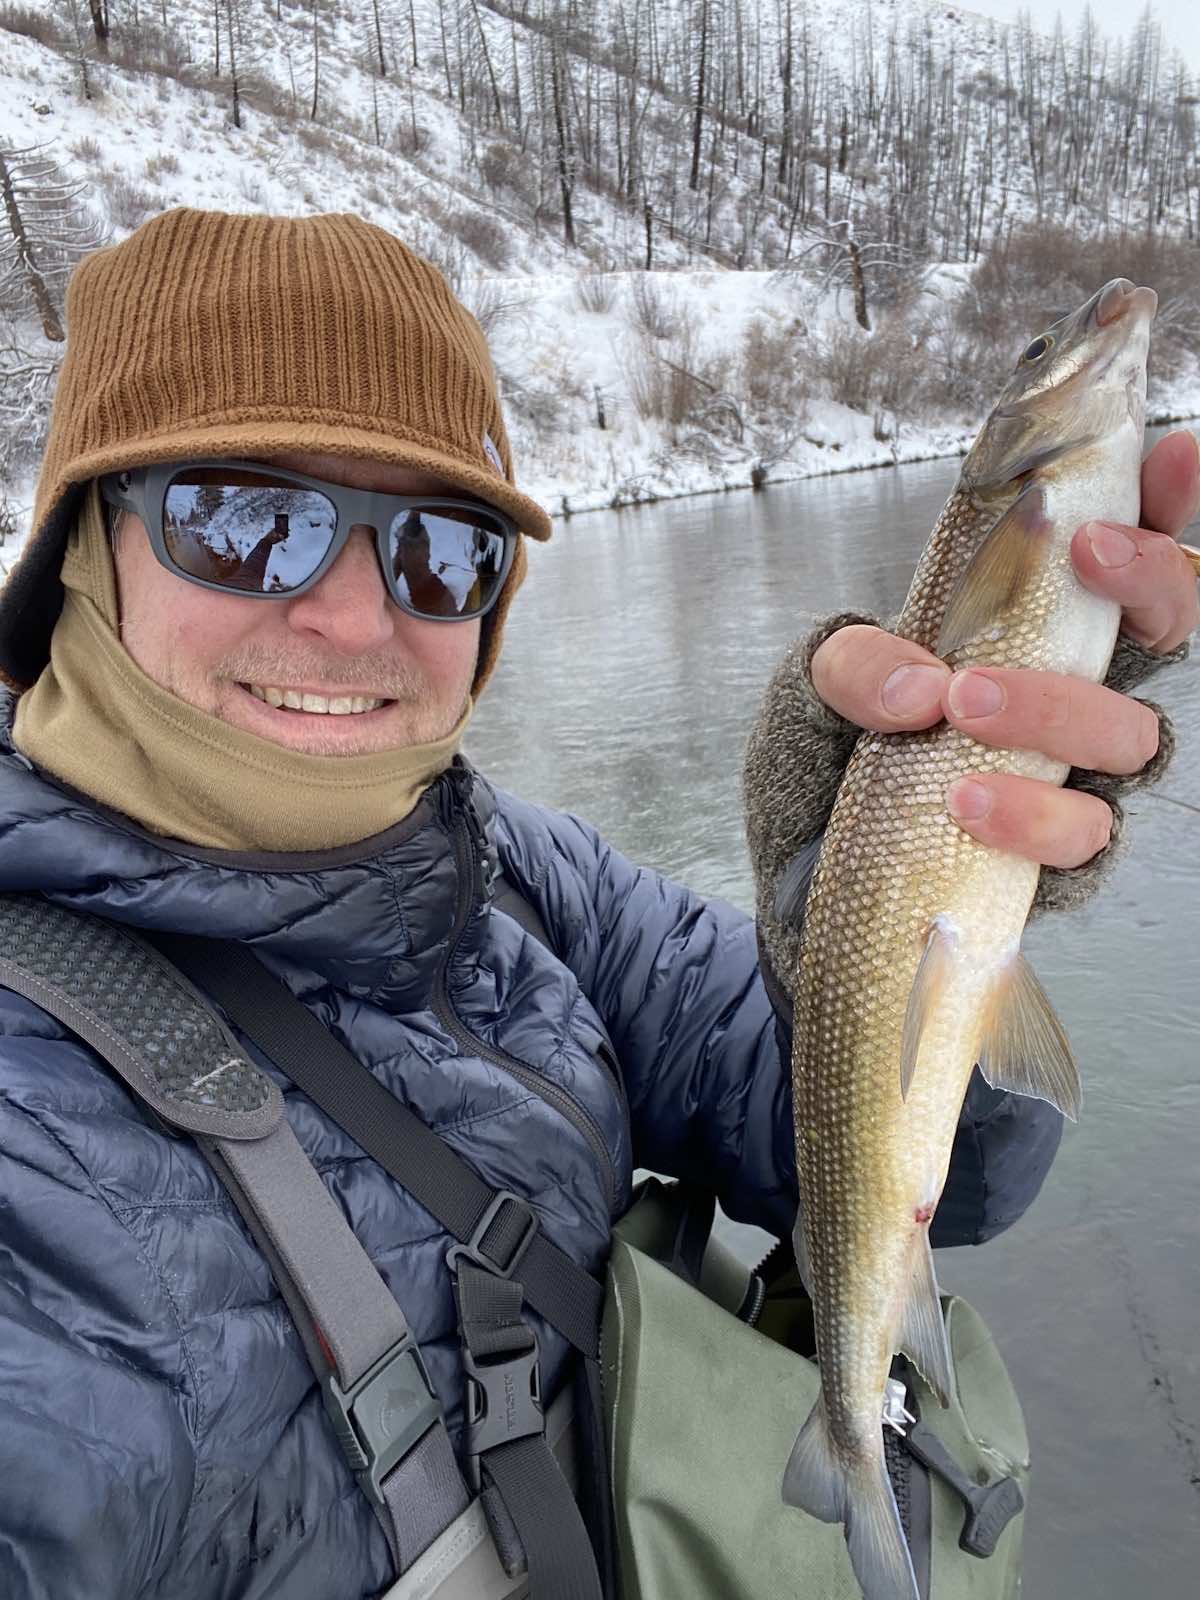 Whitefish caught on dry fly during wintertime